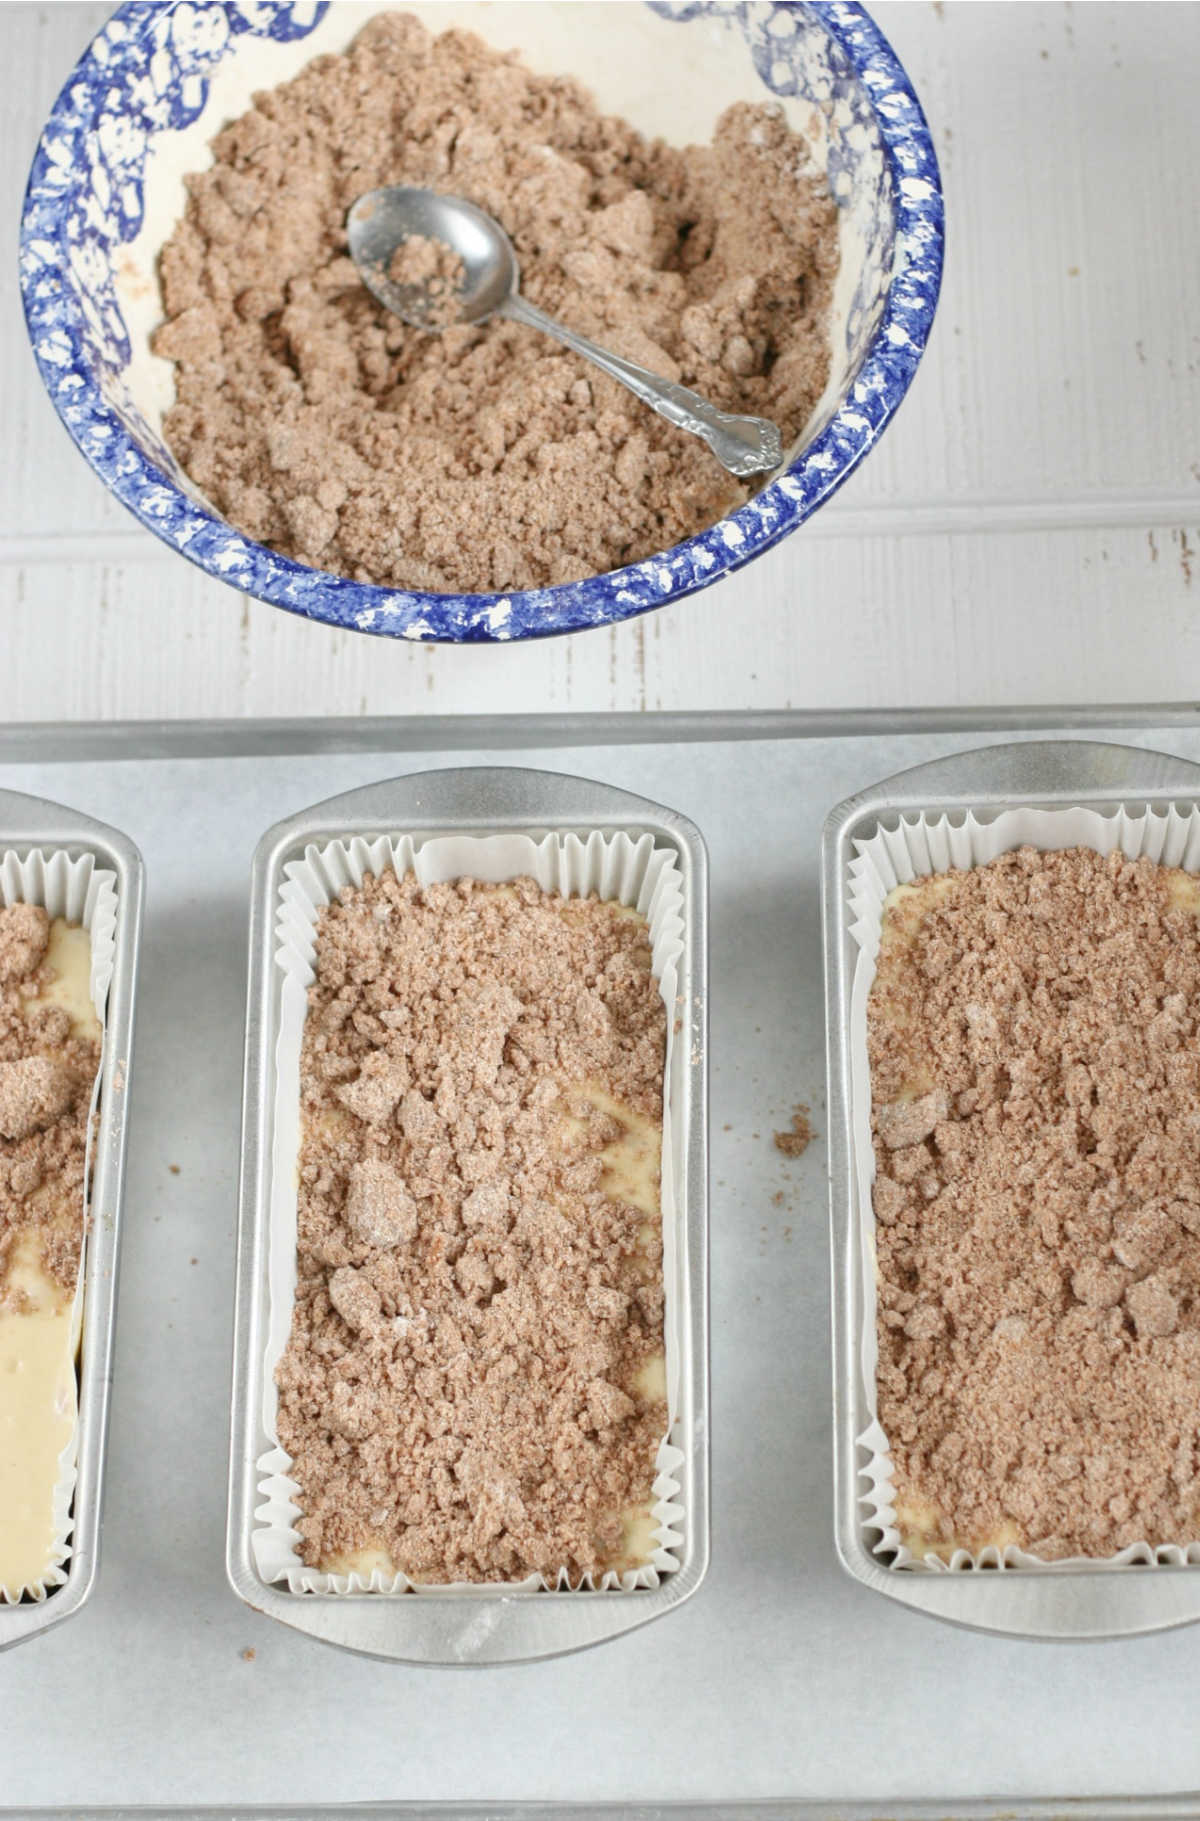 Coffee cake batter with crumb topping in metal loaf pans on half sheet pan.